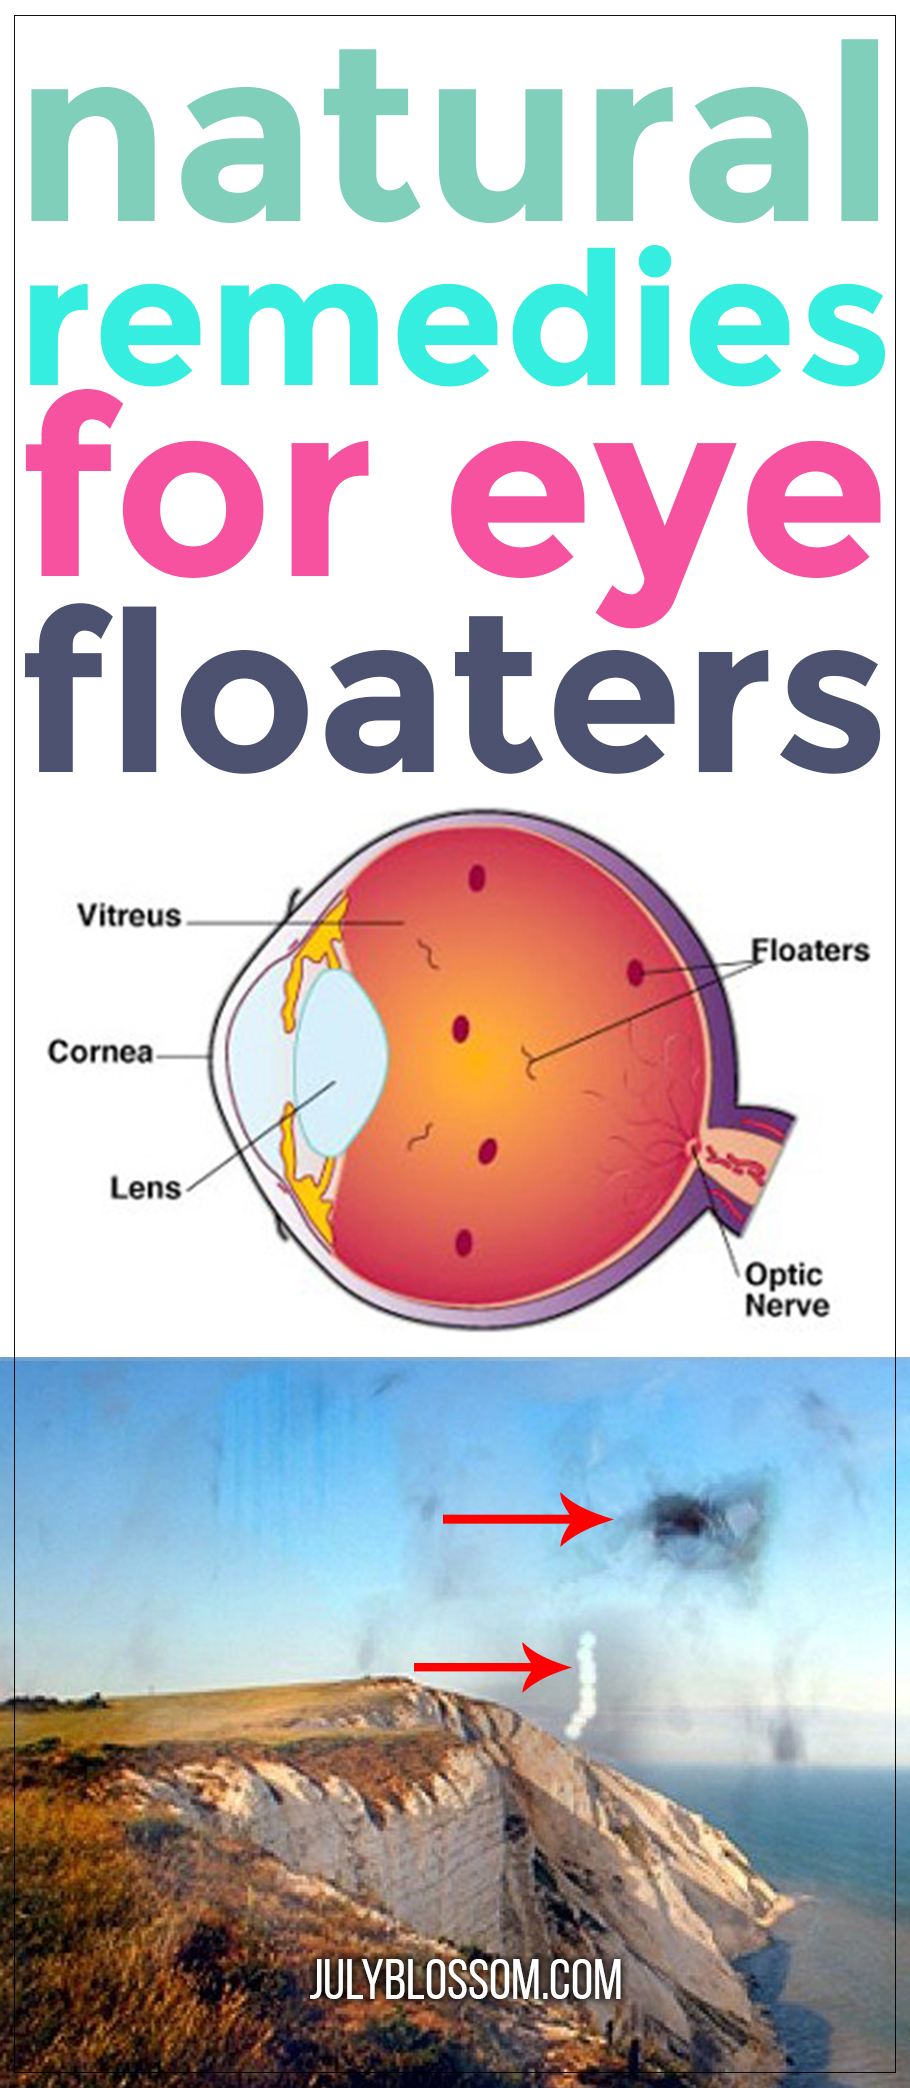 I see floaters all the time. They are super annoying and depressing. Sometimes I think there’s a mosquito buzzing around near me but then I realize it’s a pesky old floater. Do you struggle with the same issues? I feel you. That’s why in this article I share some natural remedies for eye floaters that may help you.